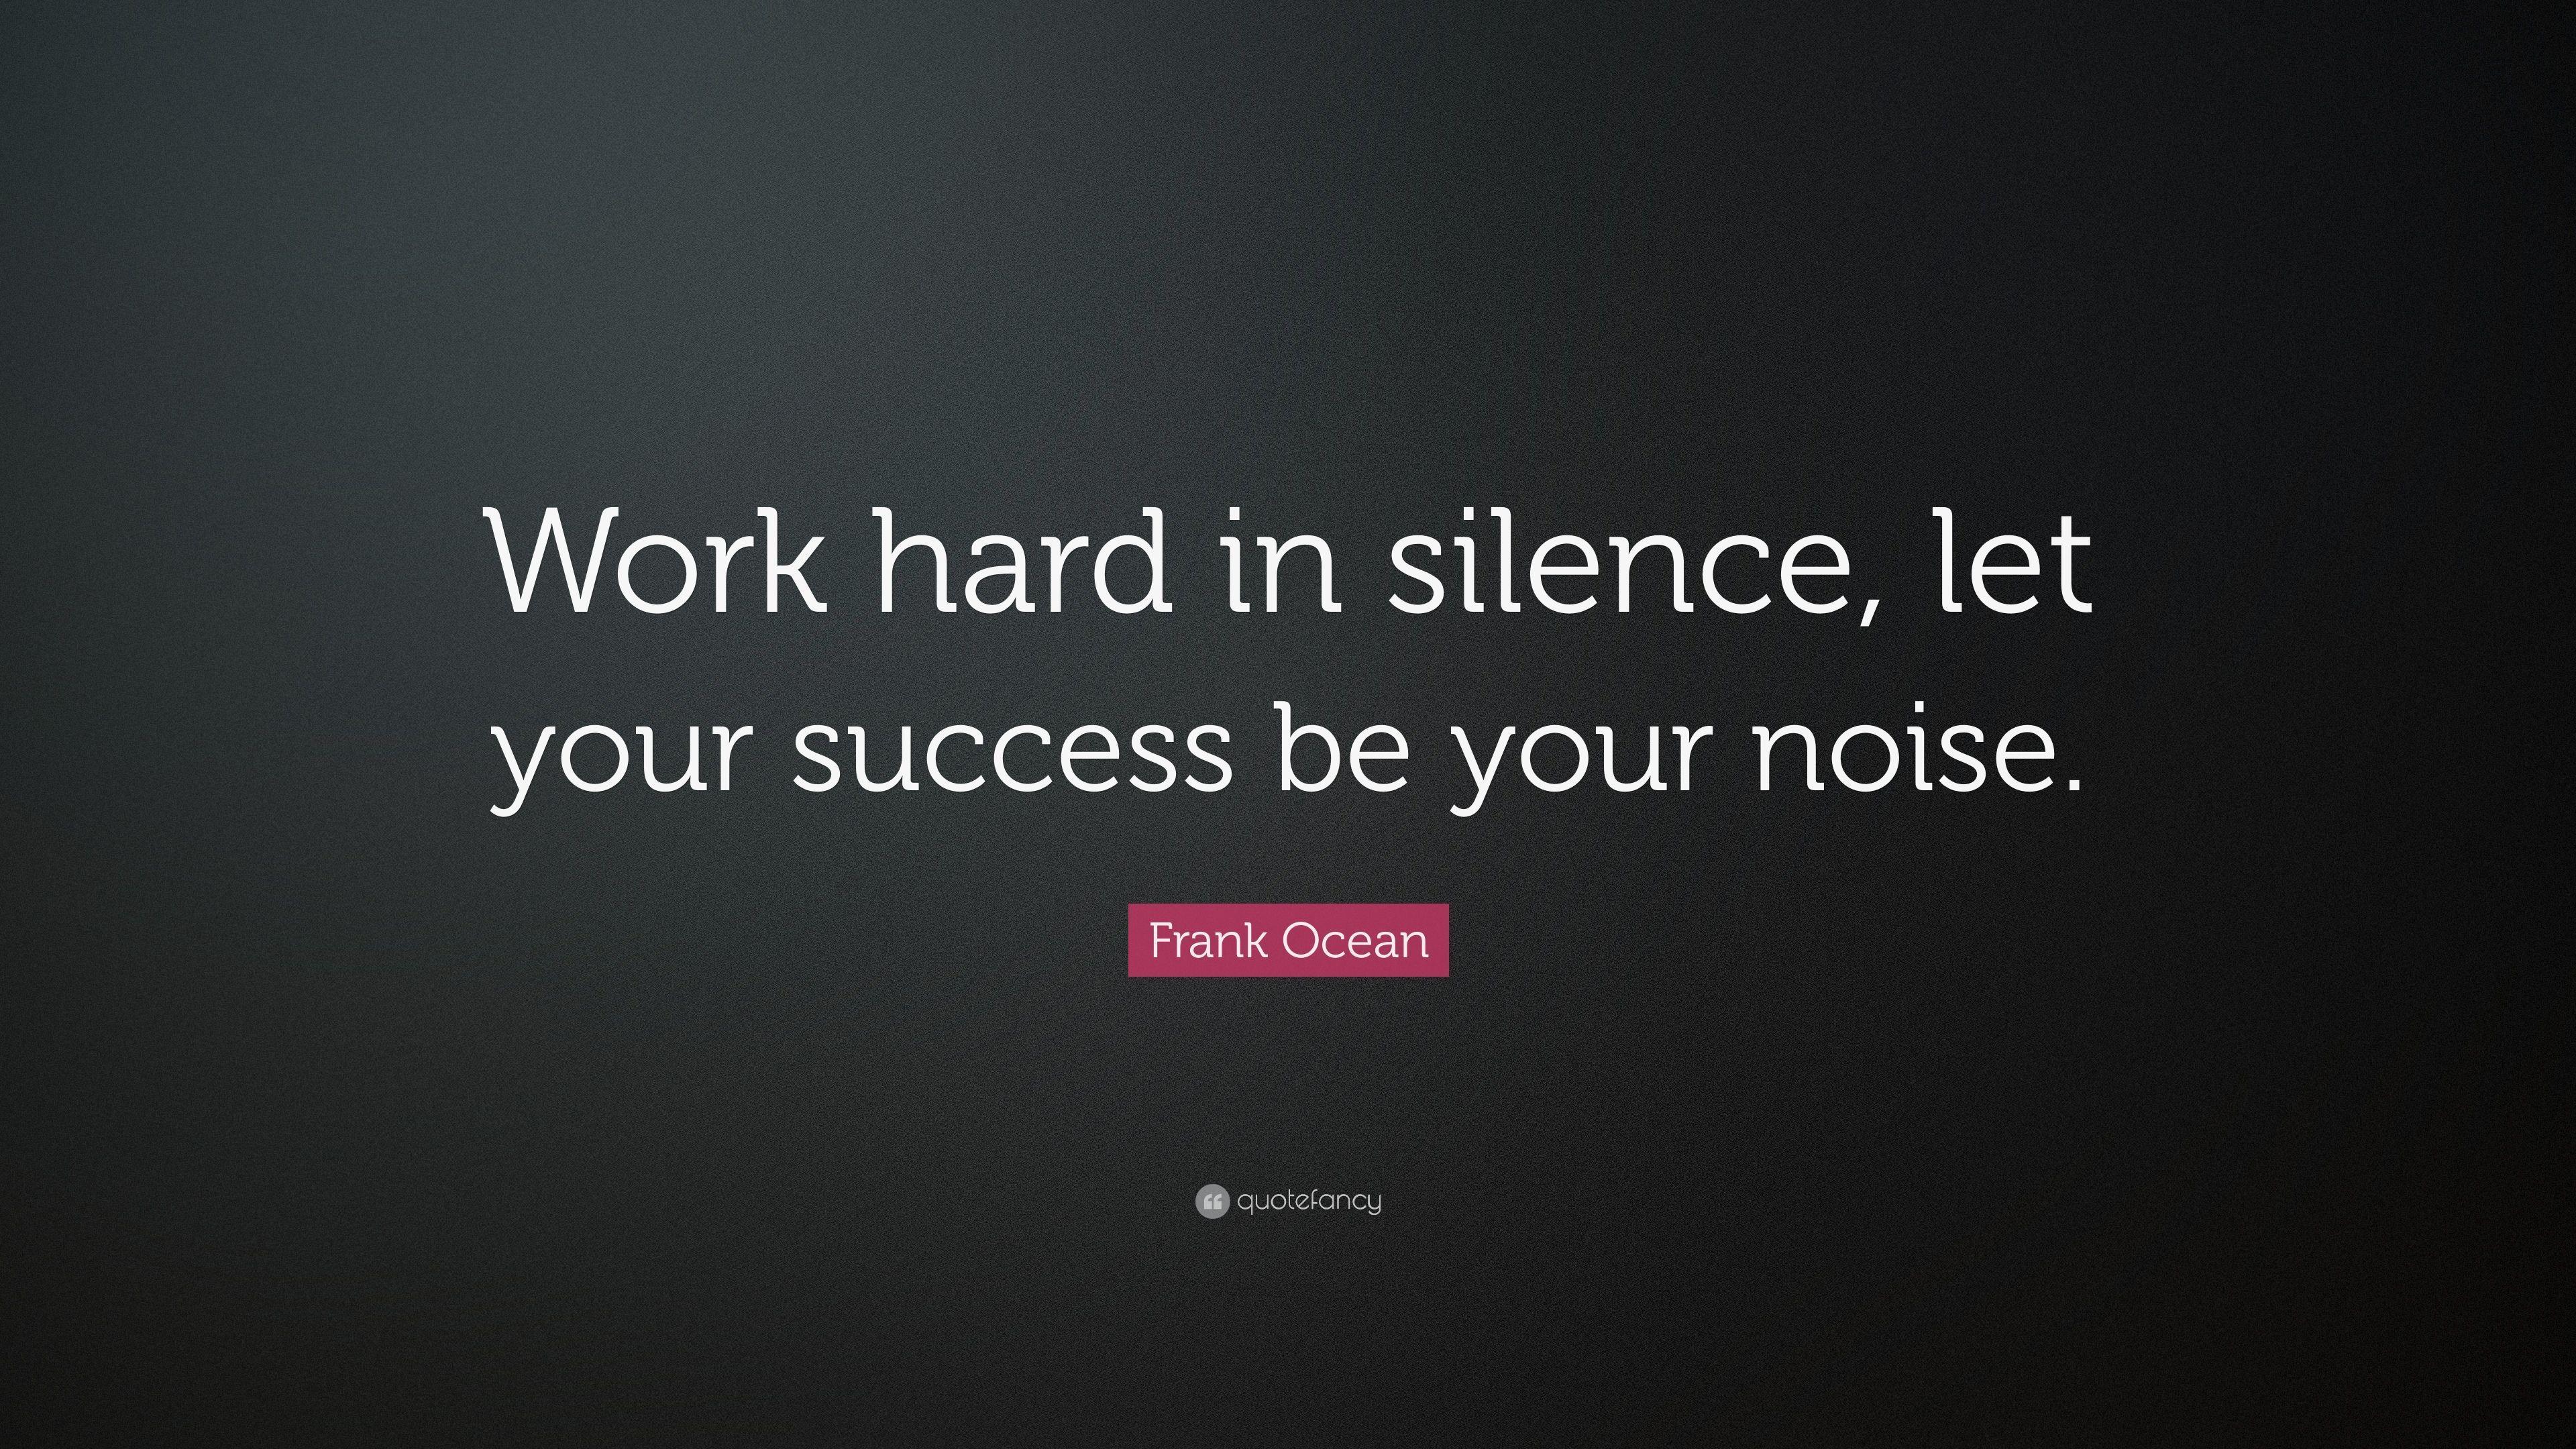 Frank Ocean Quote: “Work hard in silence, let your success be your